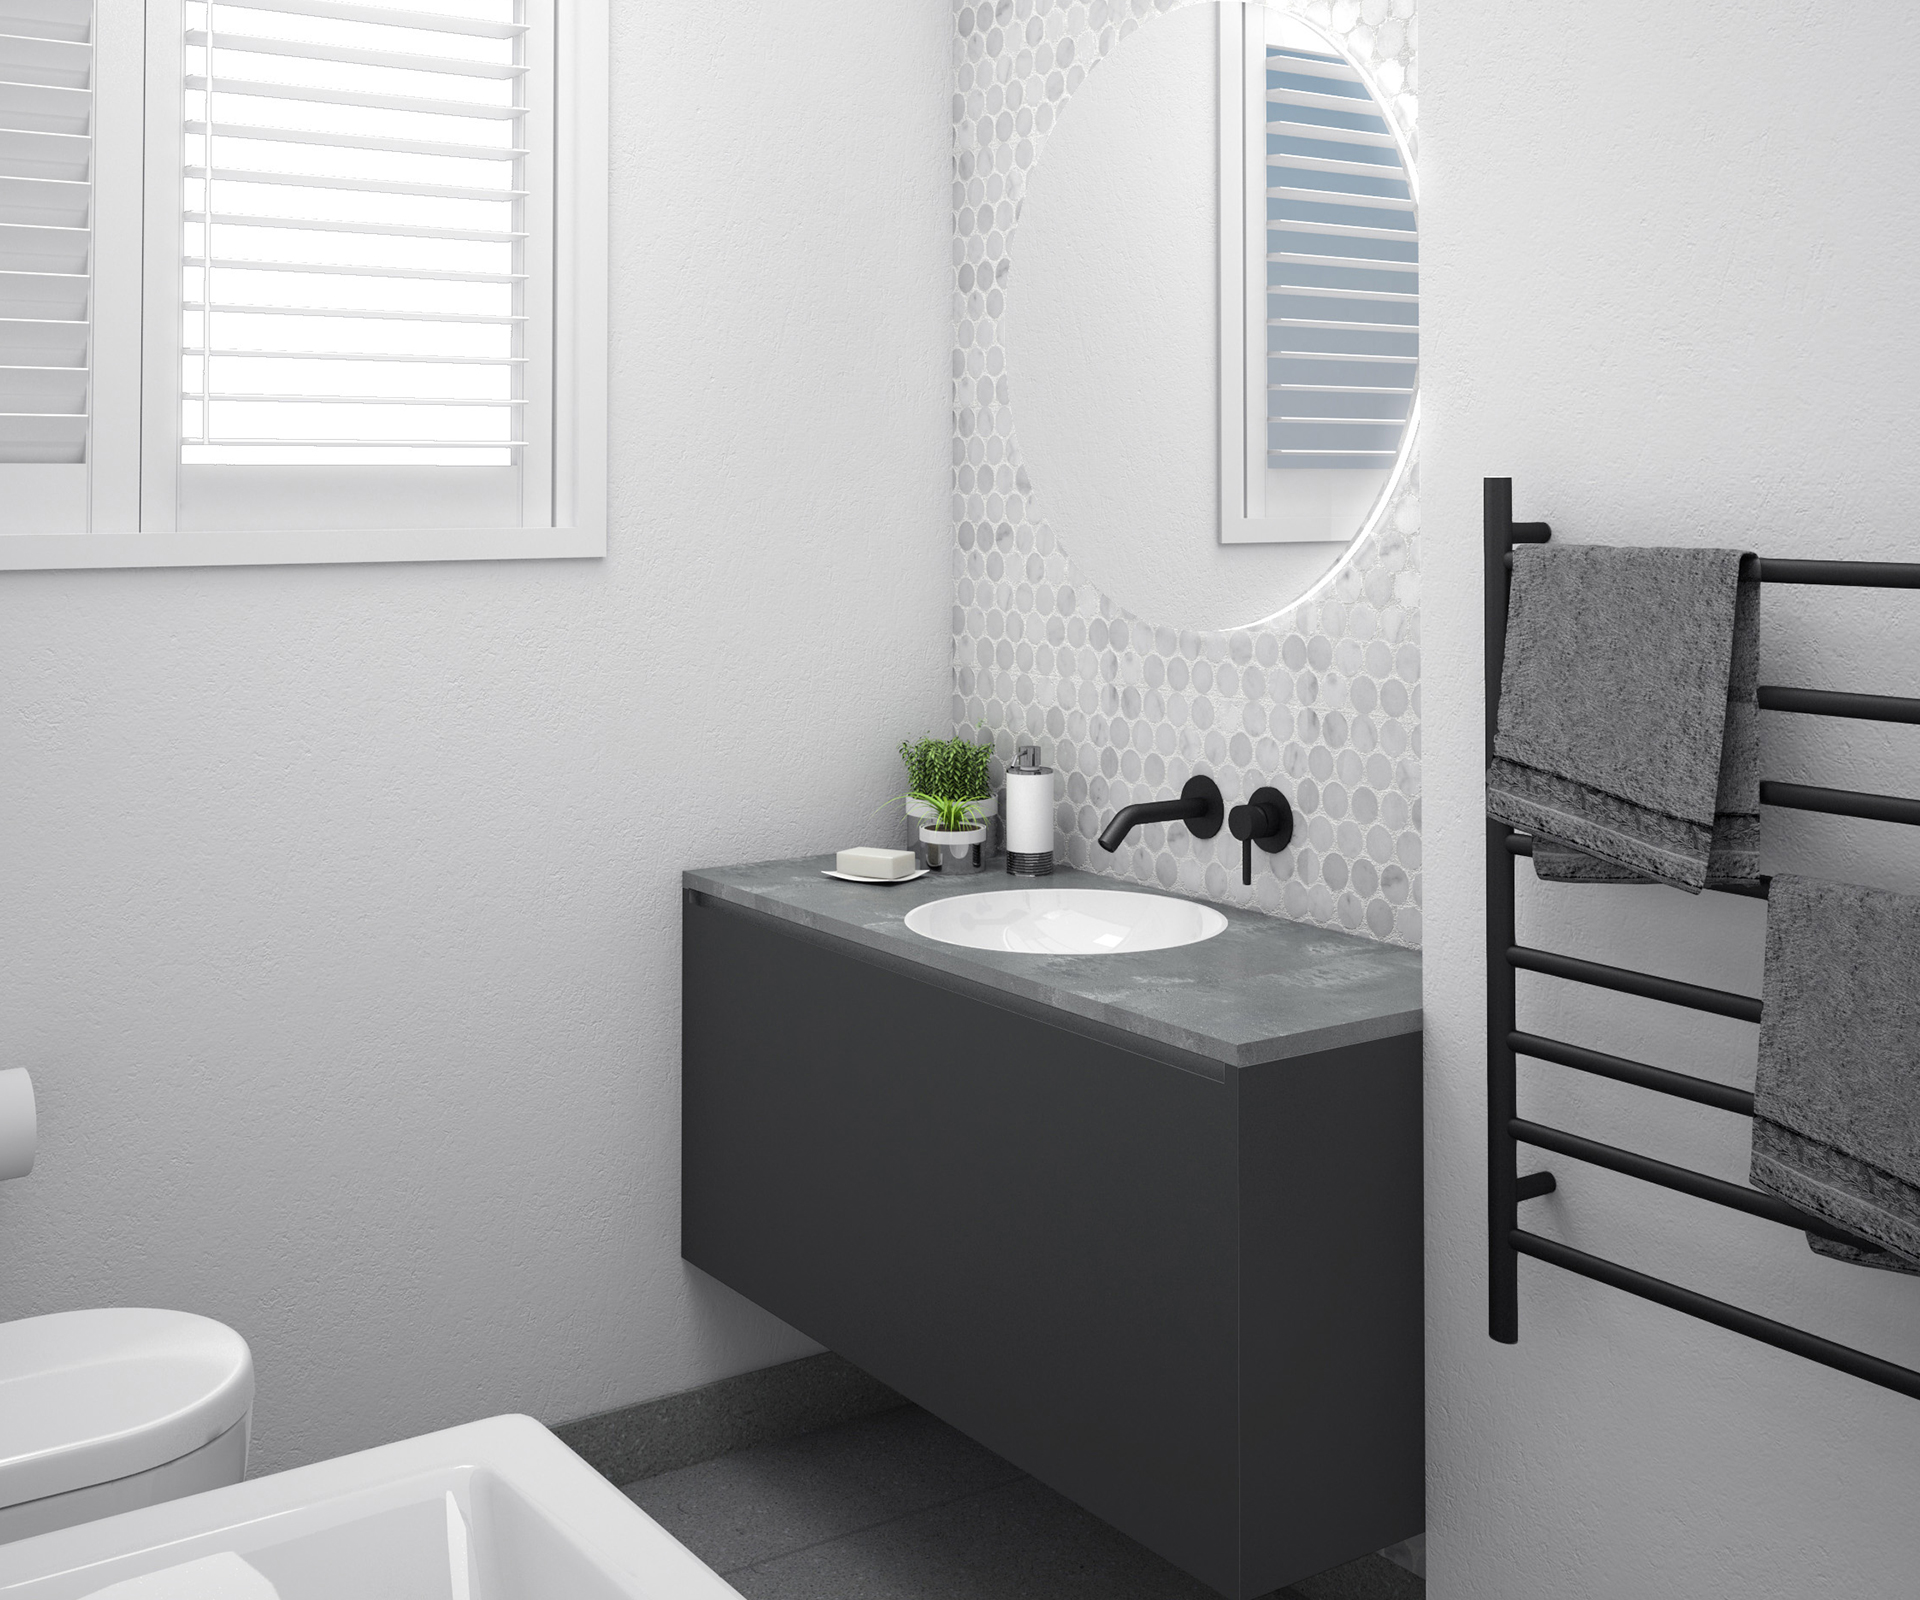 4 Ways To Redesign A Small Family Bathroom With A 28 000 Budget